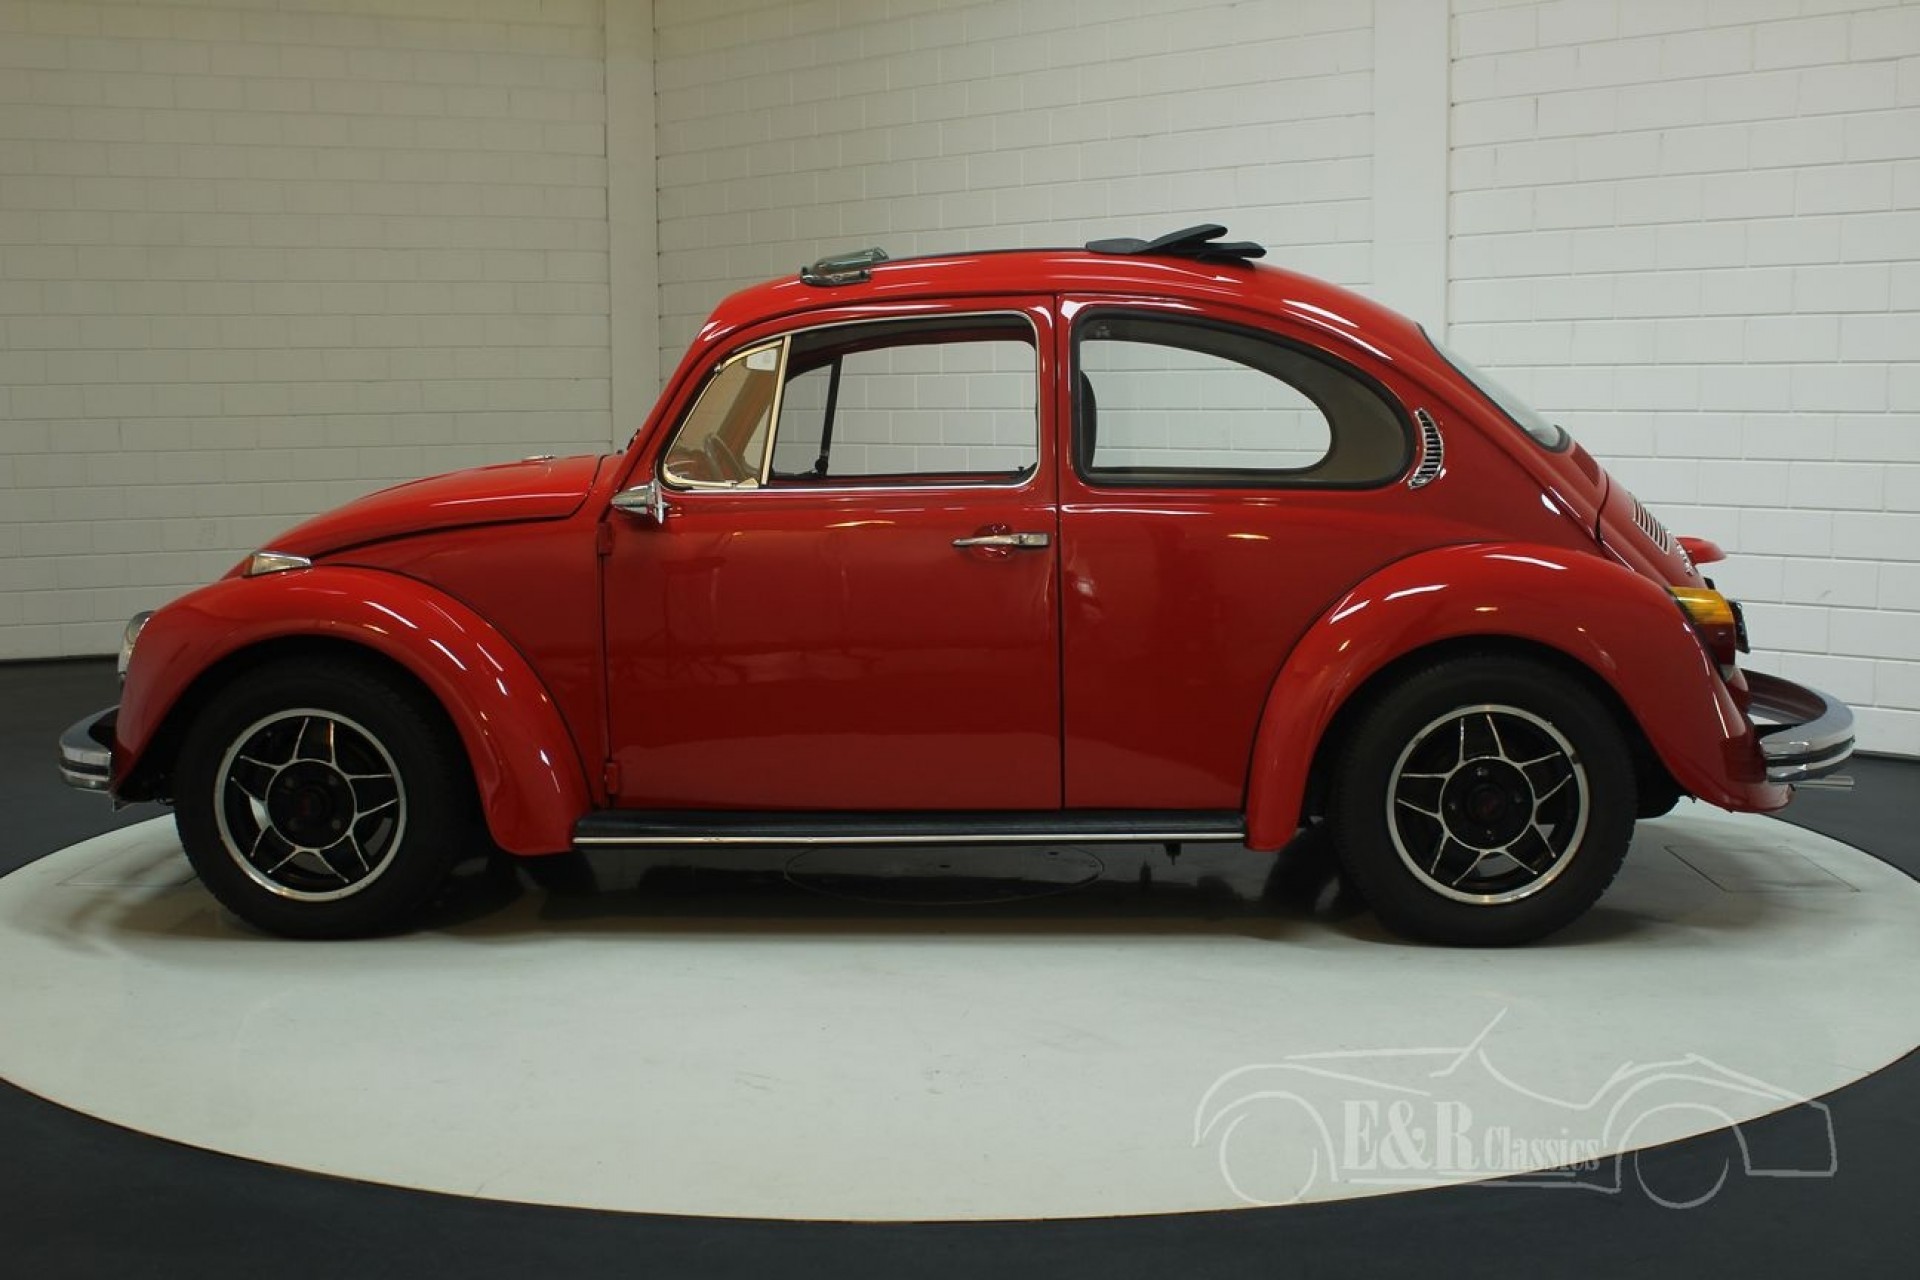 Volkswagen Beetle 1980 for sale at Erclassics